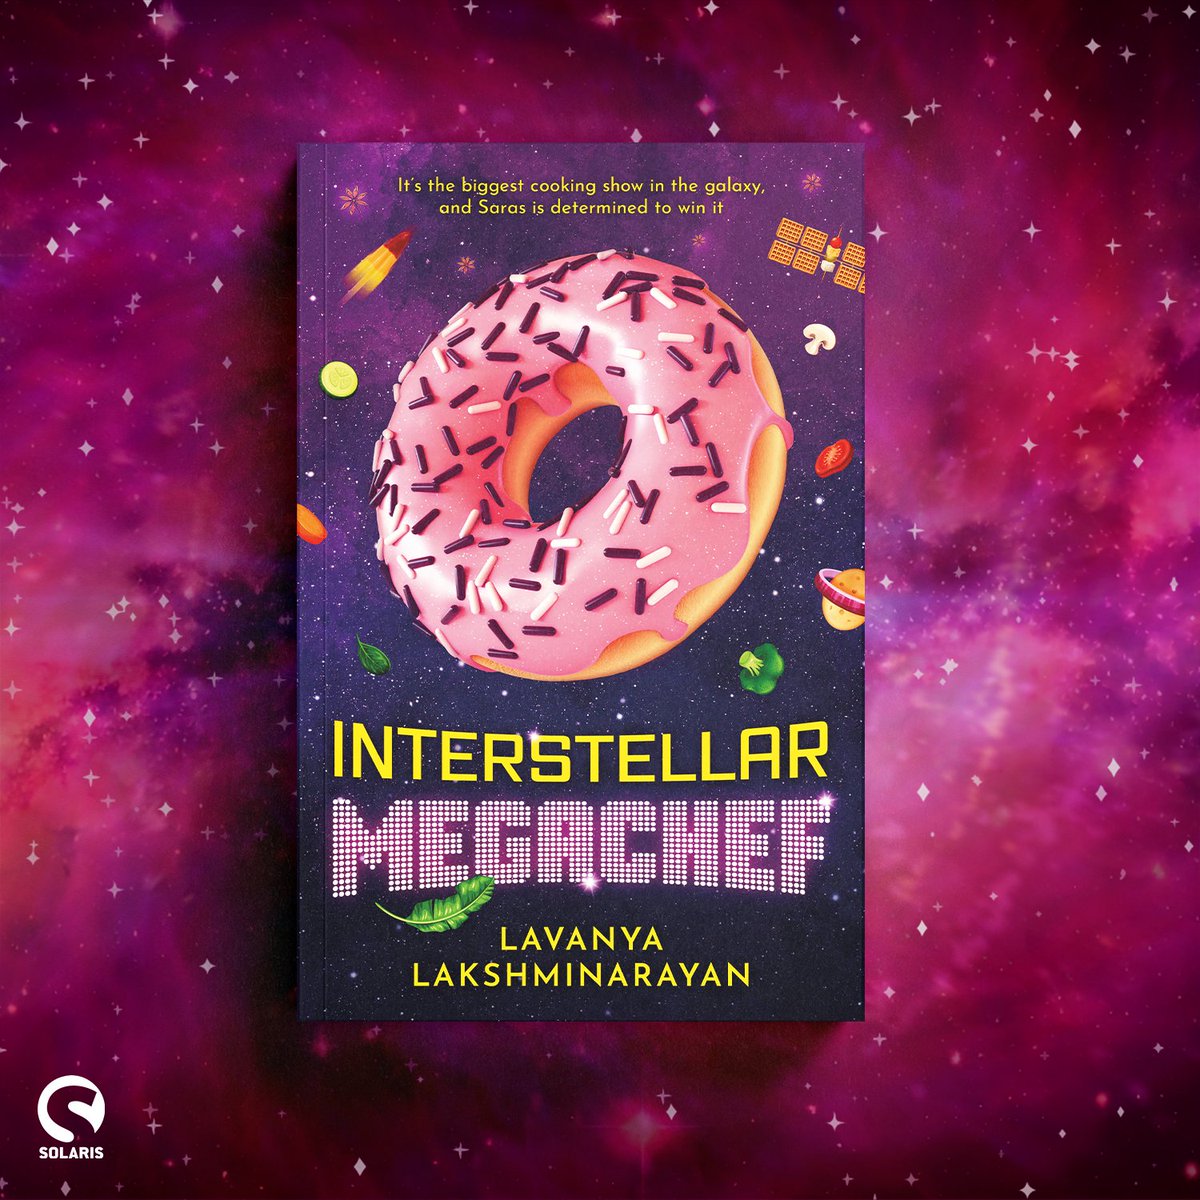 🚨COVER REVEAL🚨 Feast your eyes upon the deliciously delightful cover for INTERSTELLAR MEGACHEF by @lavanya_ln! Cover art by our very own Sam Gretton. Think The Great British Bake Off - In Space! Out November 2024. Preorder now: geni.us/Megachef